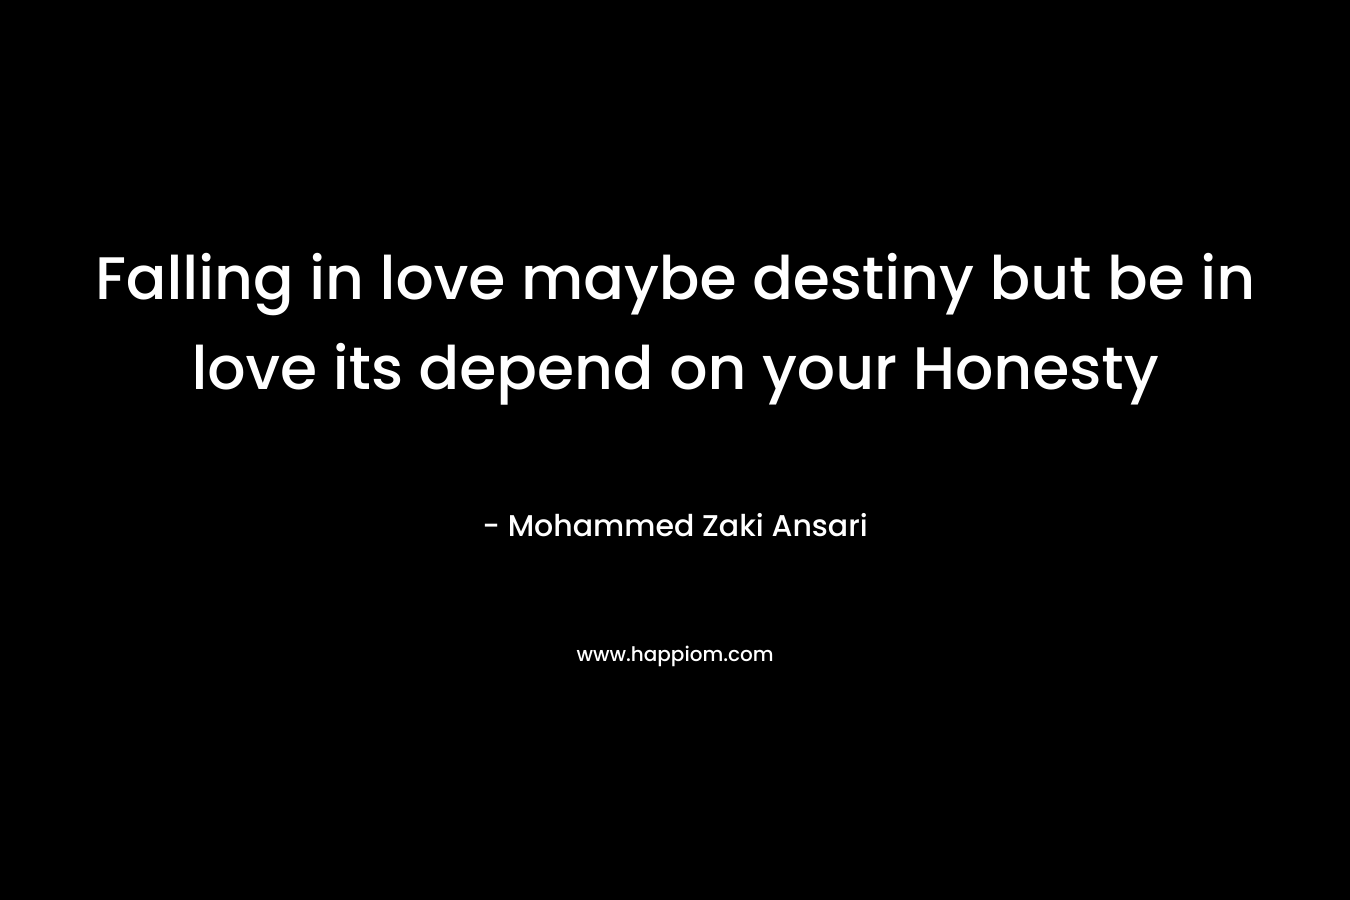 Falling in love maybe destiny but be in love its depend on your Honesty